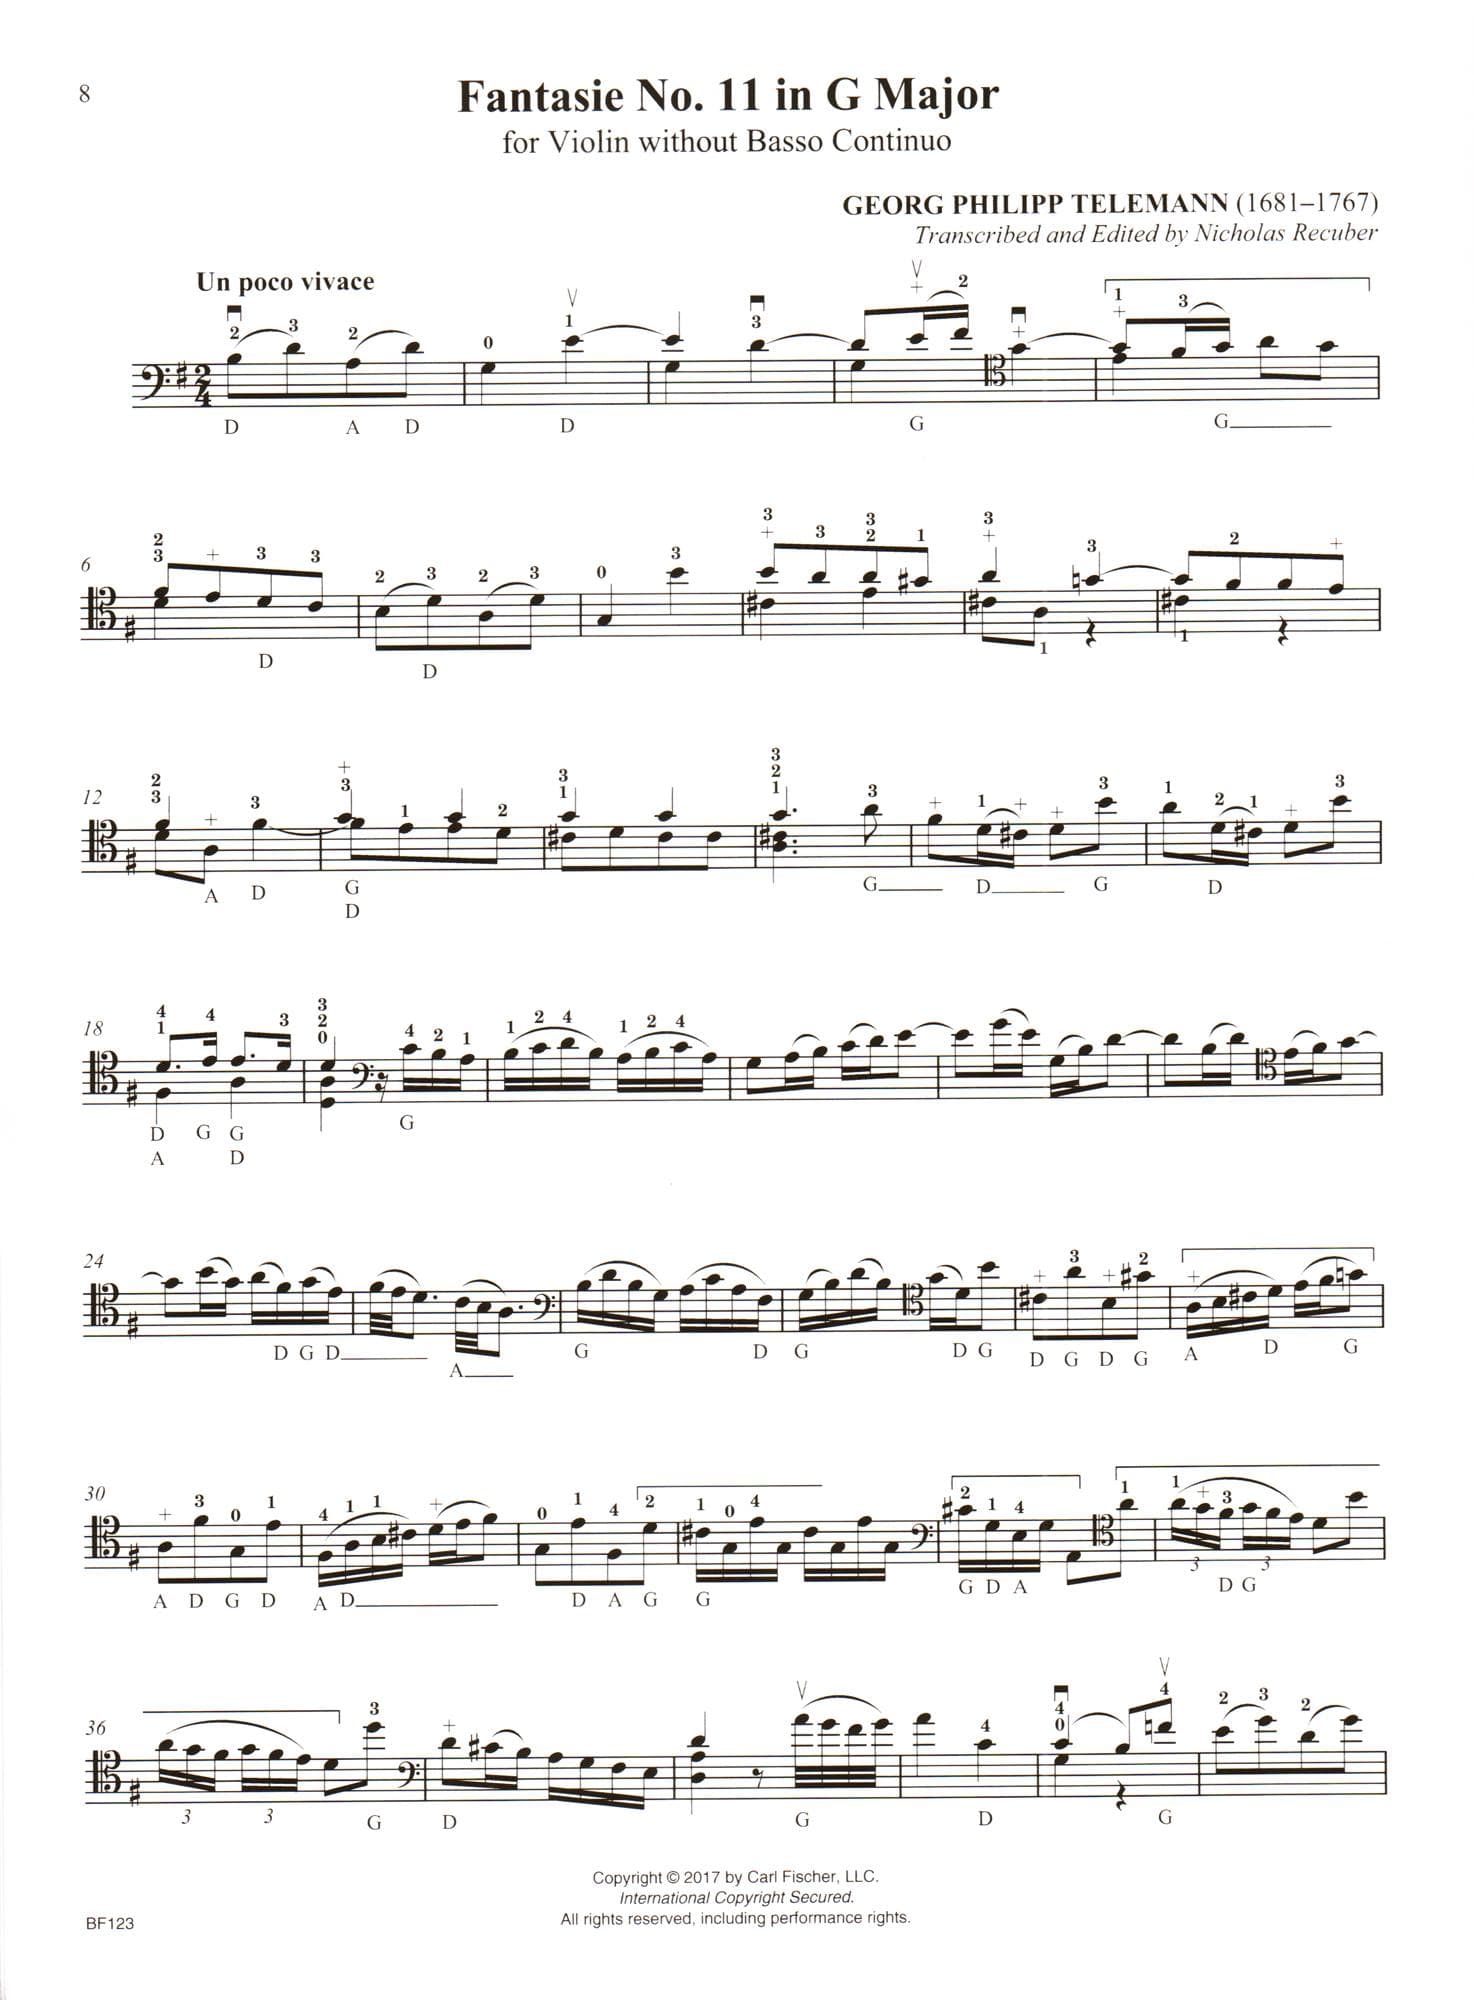 Telemann, G.P. - Fantasies for the Double Bass - for Solo Bass - transcribed and edited by Nicholas Recuber - Carl Fischer